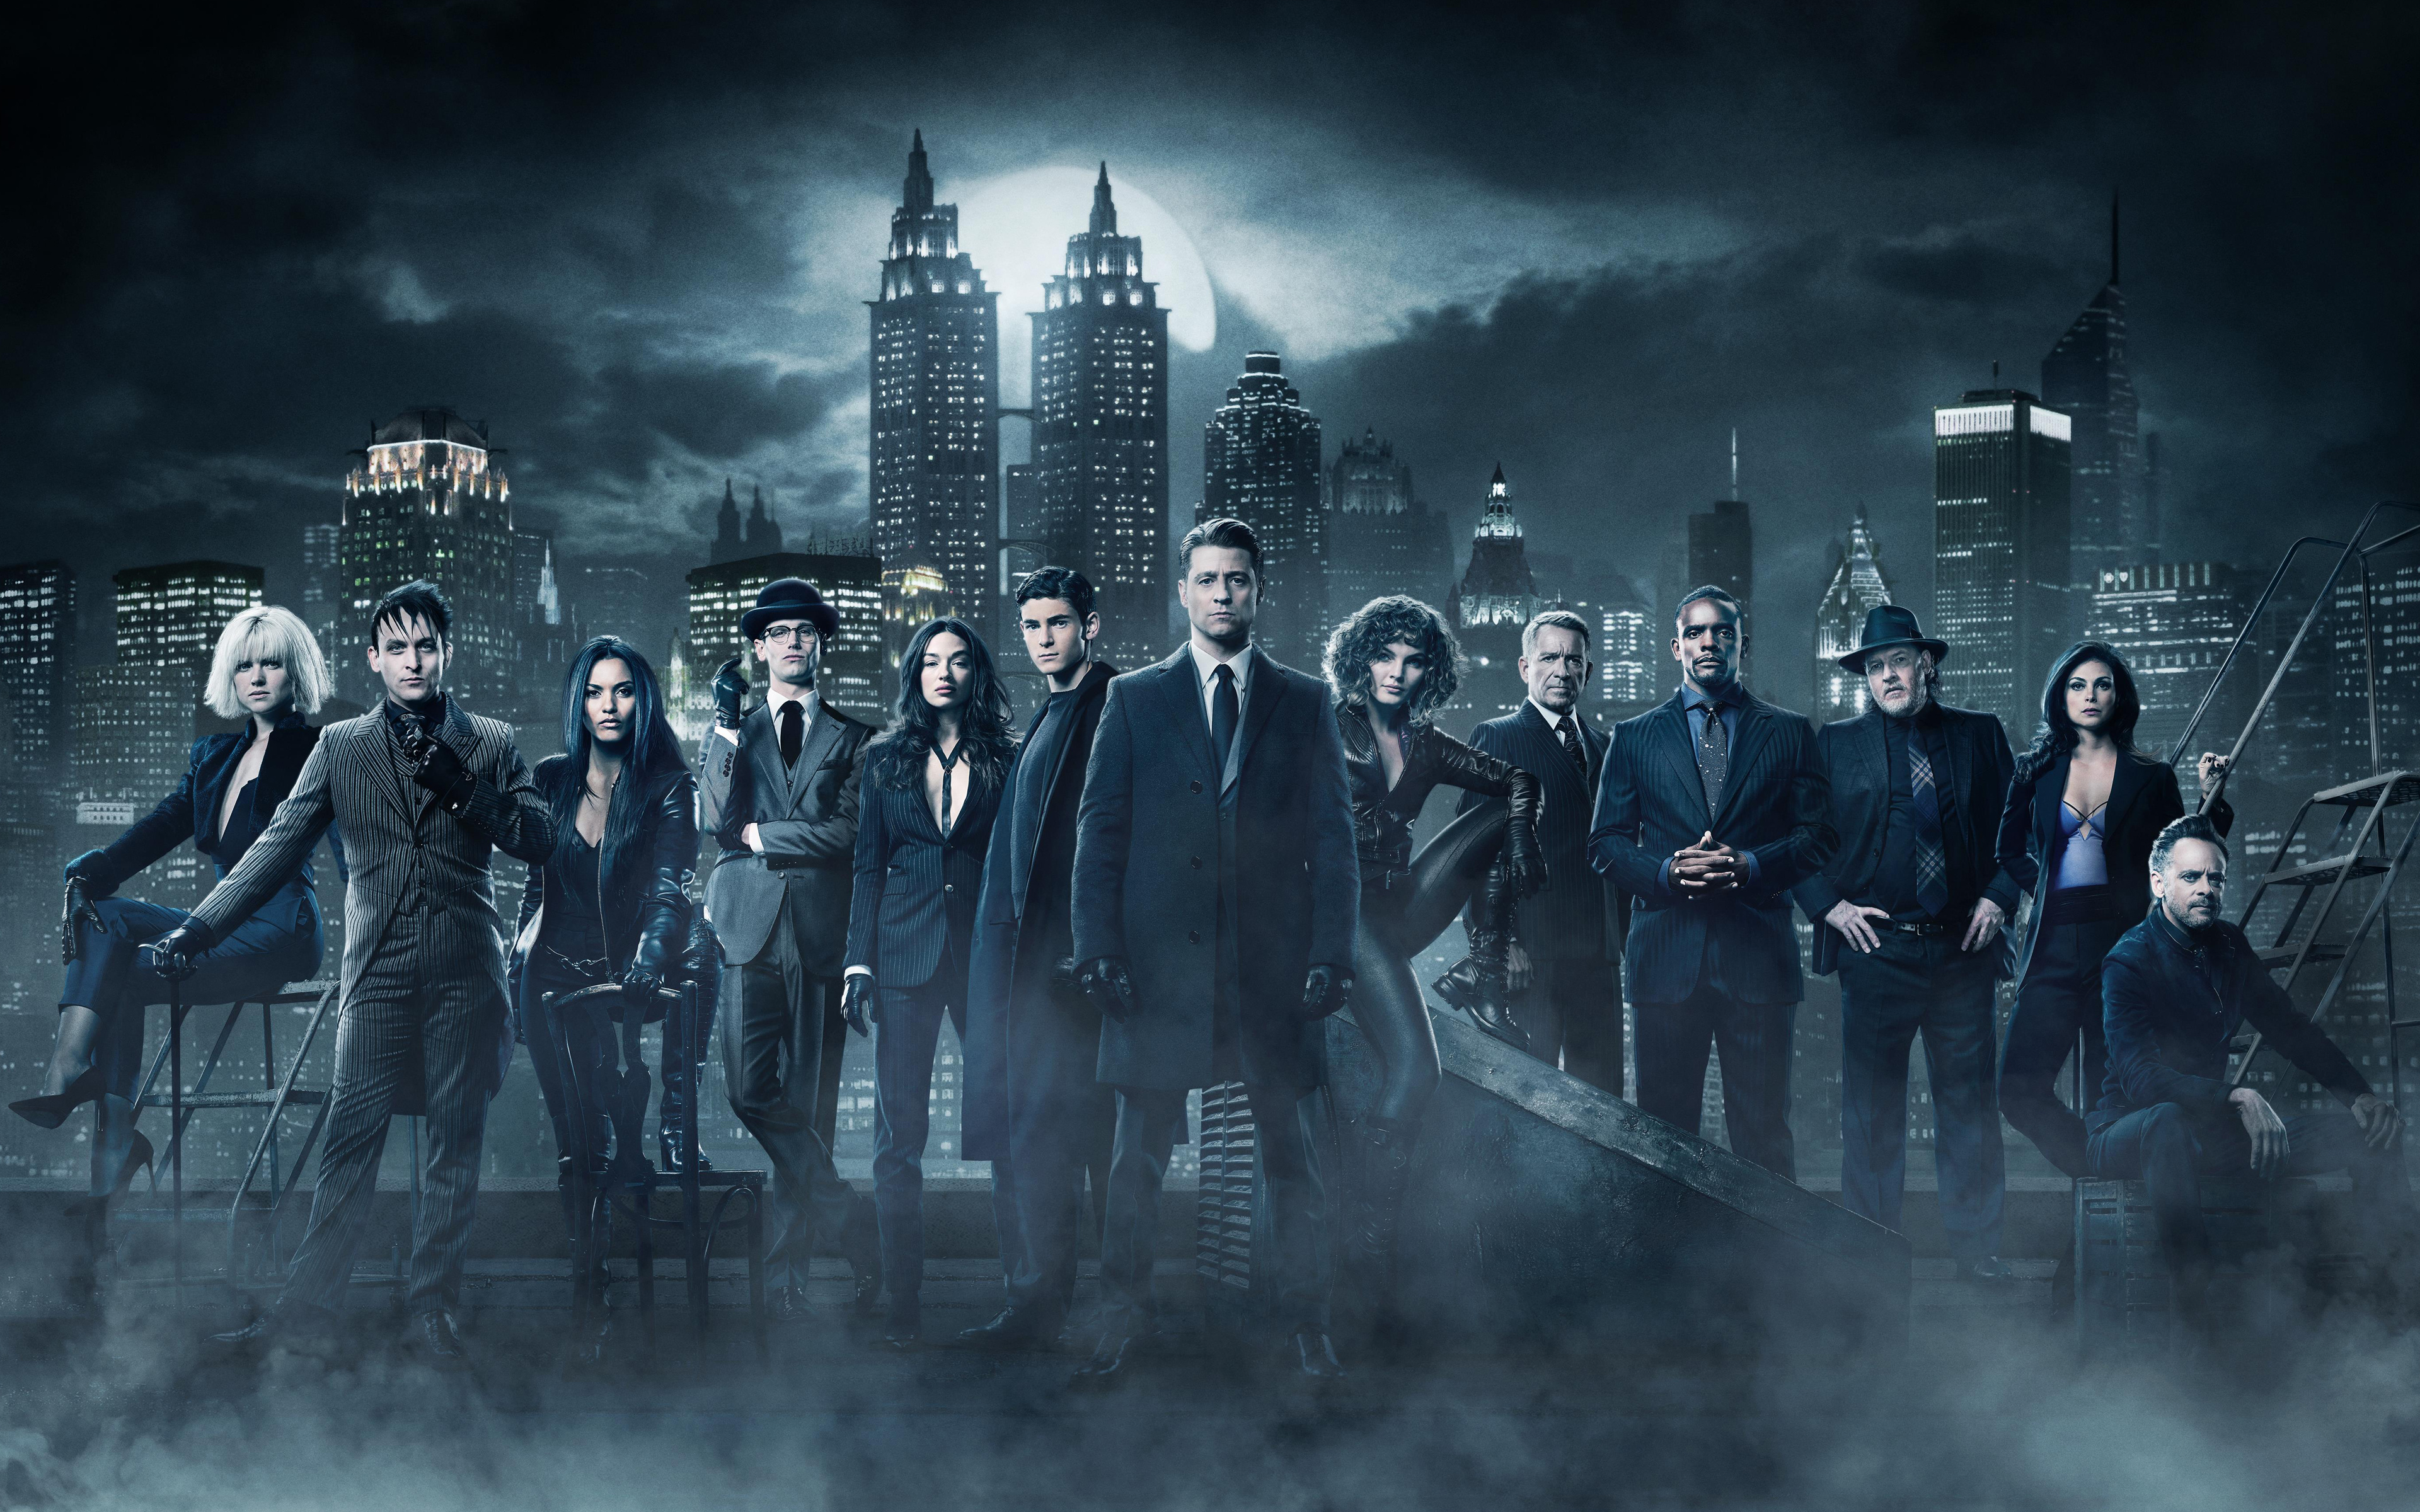 Gotham Wallpapers and Background Images   stmednet